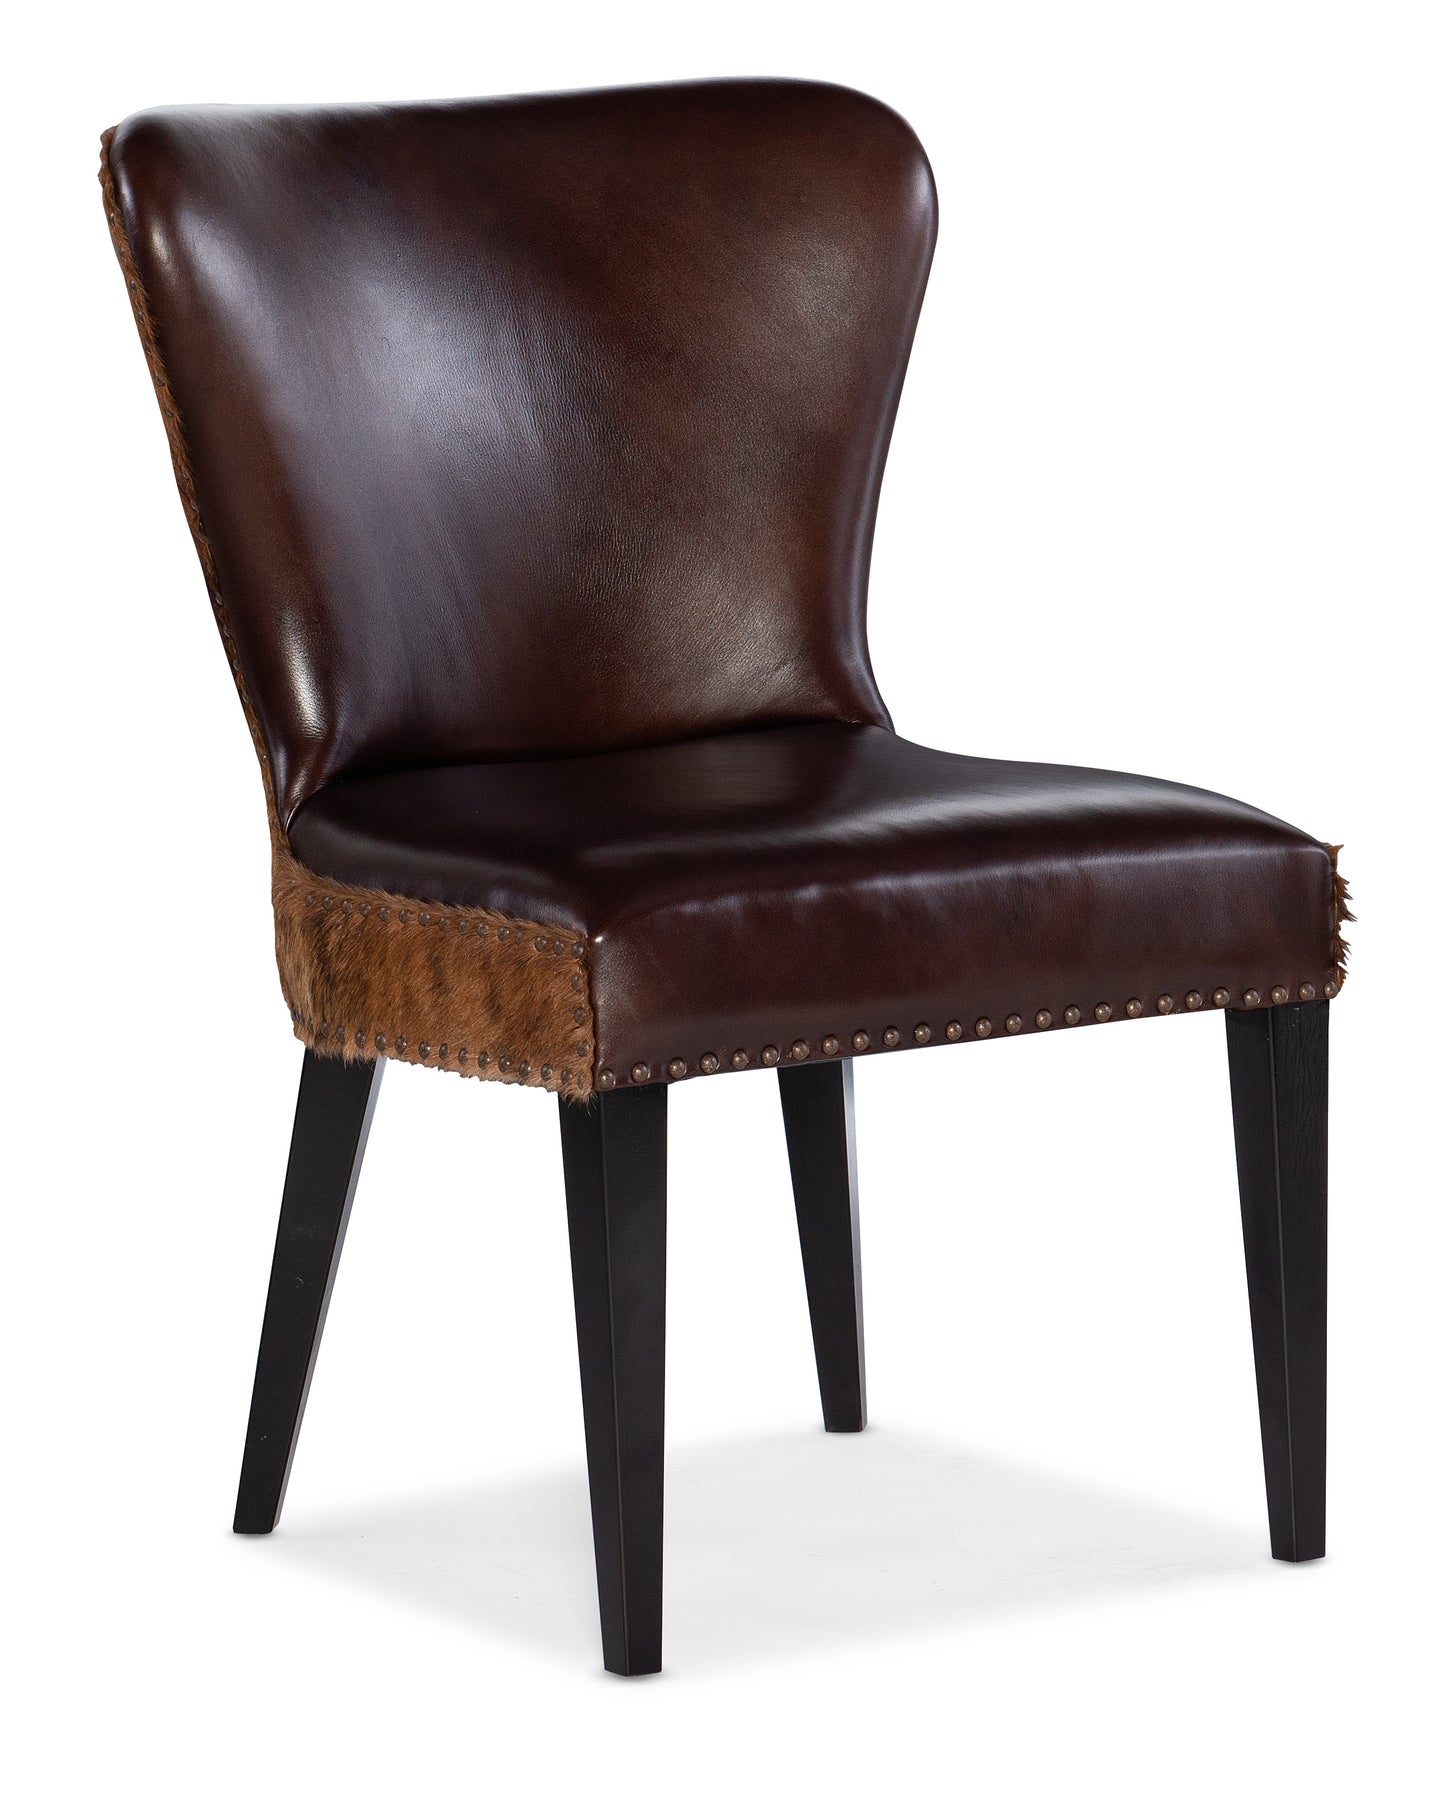 Kale Accent Chair with Dark Brindle HOH